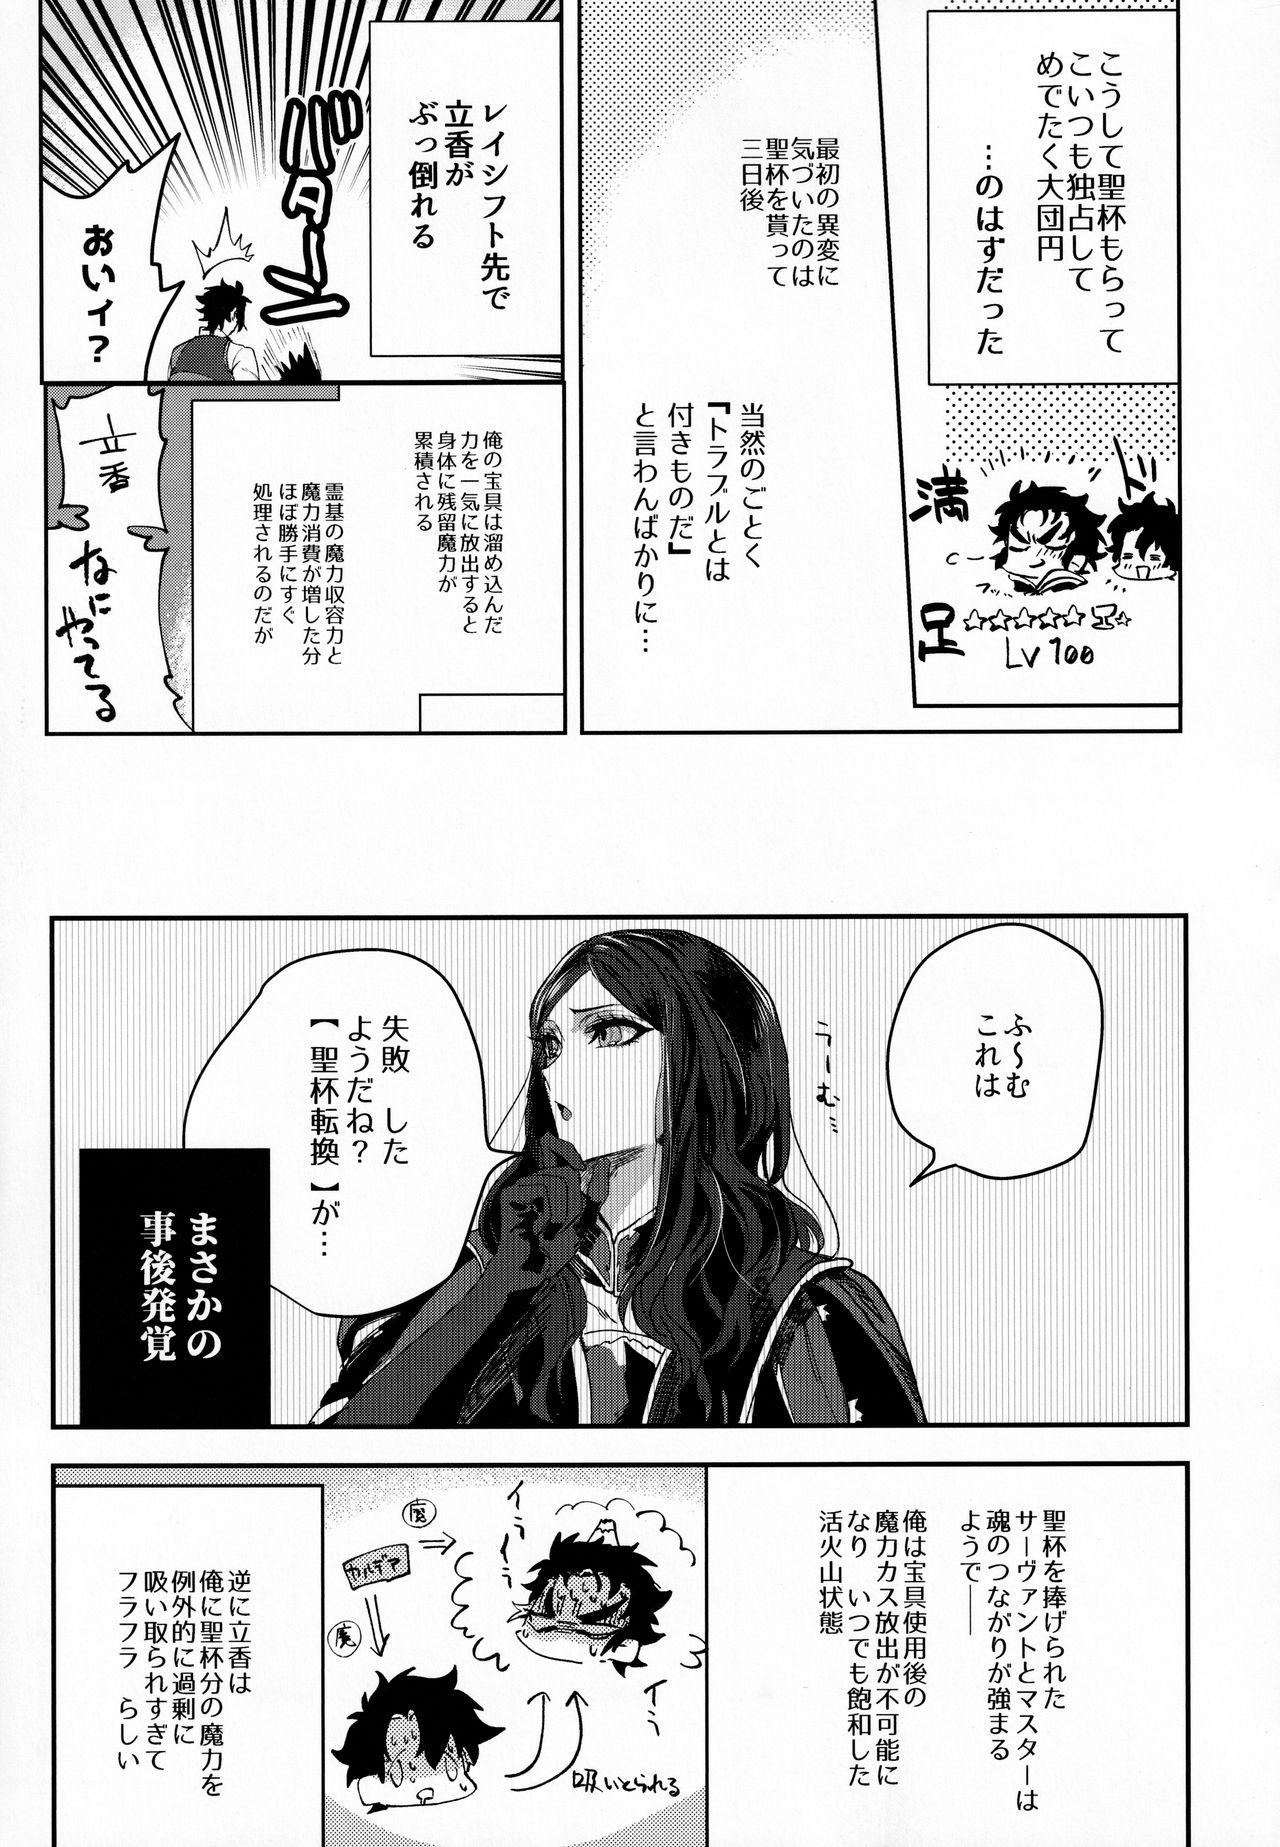 Assfucked 耽溺と熱 - Fate grand order Classy - Page 12